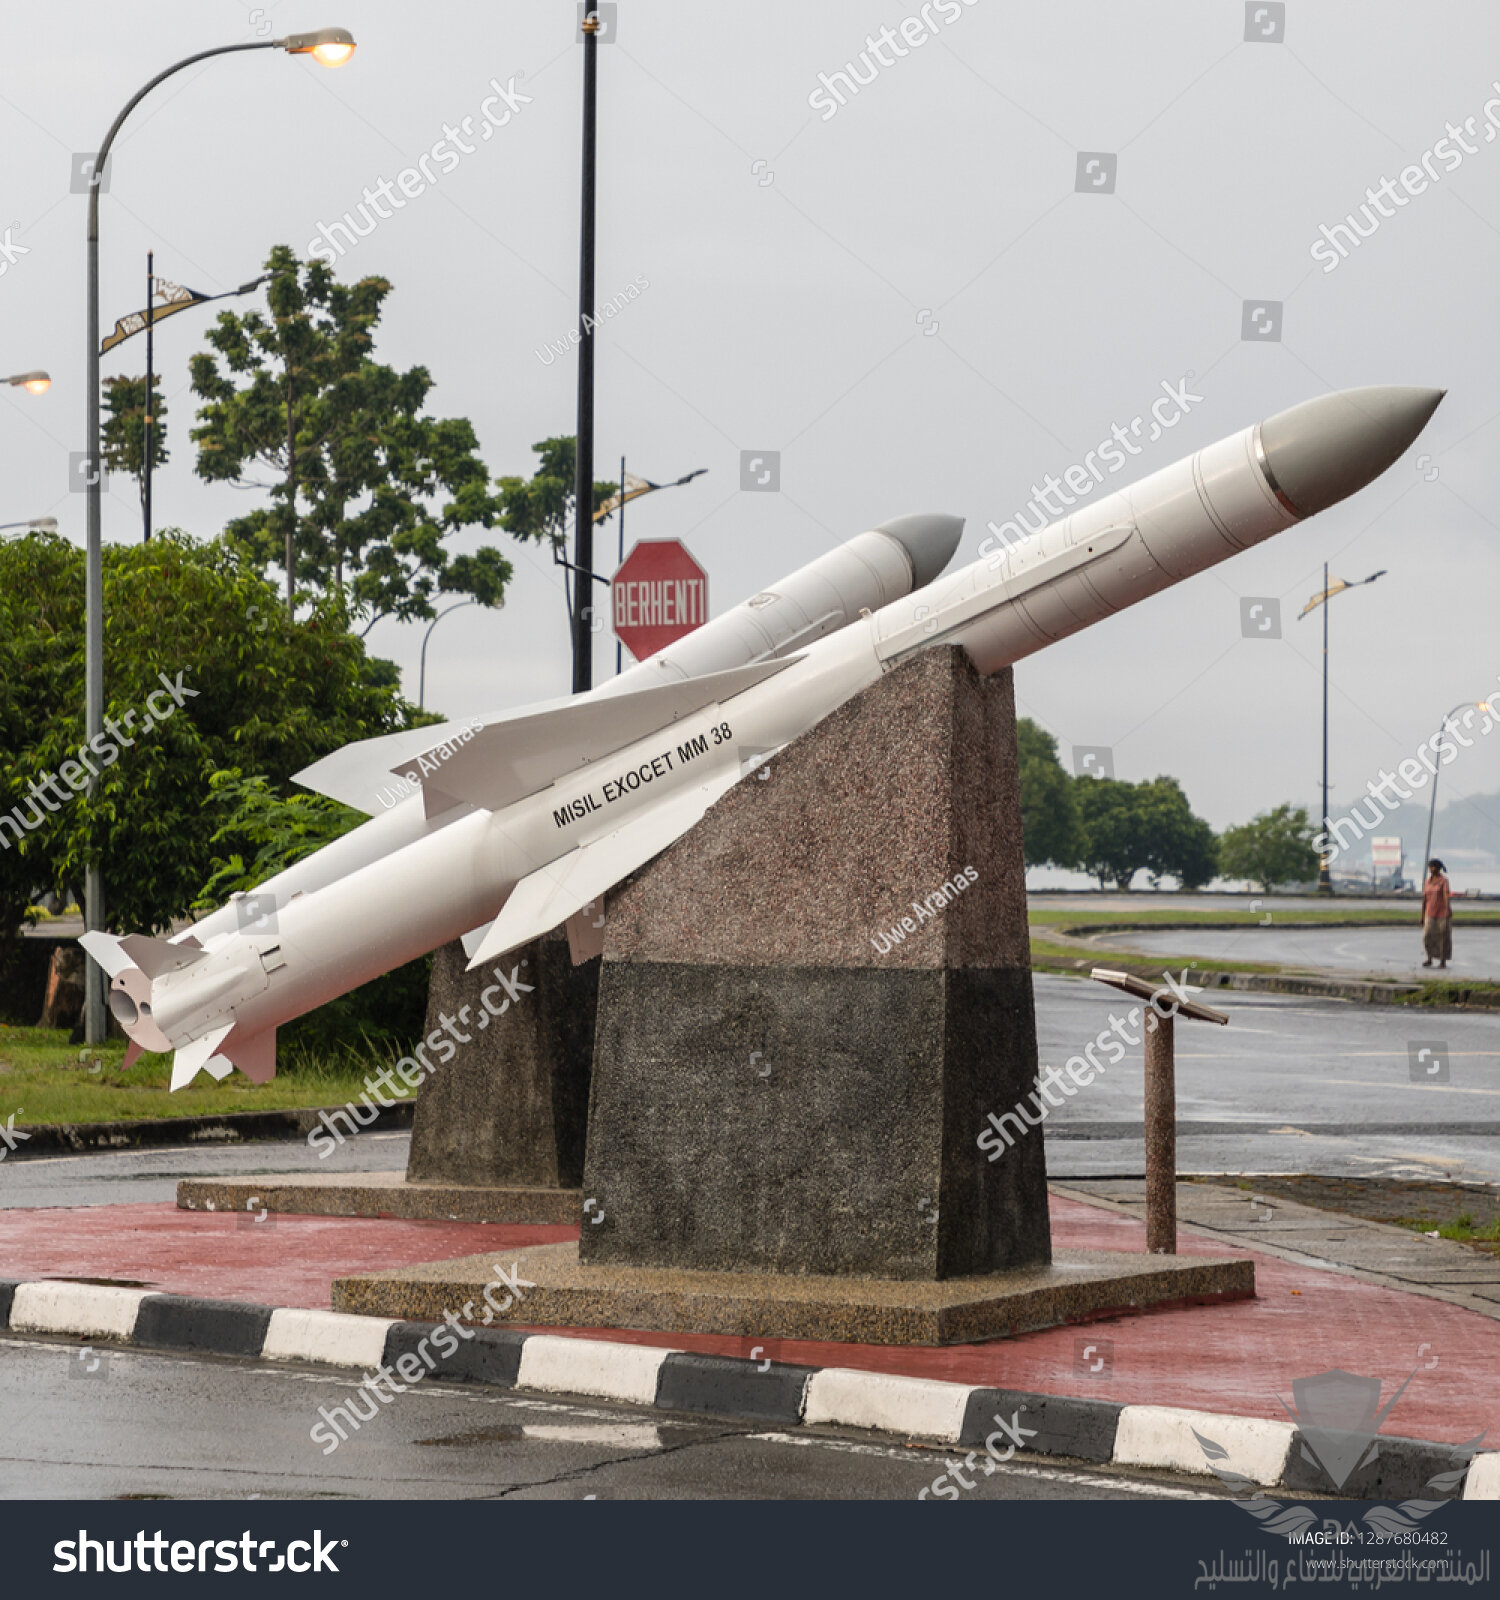 stock-photo-sandakan-sabah-malaysia-december-missile-exocet-mm-on-display-in-front-of-the-1287...jpg